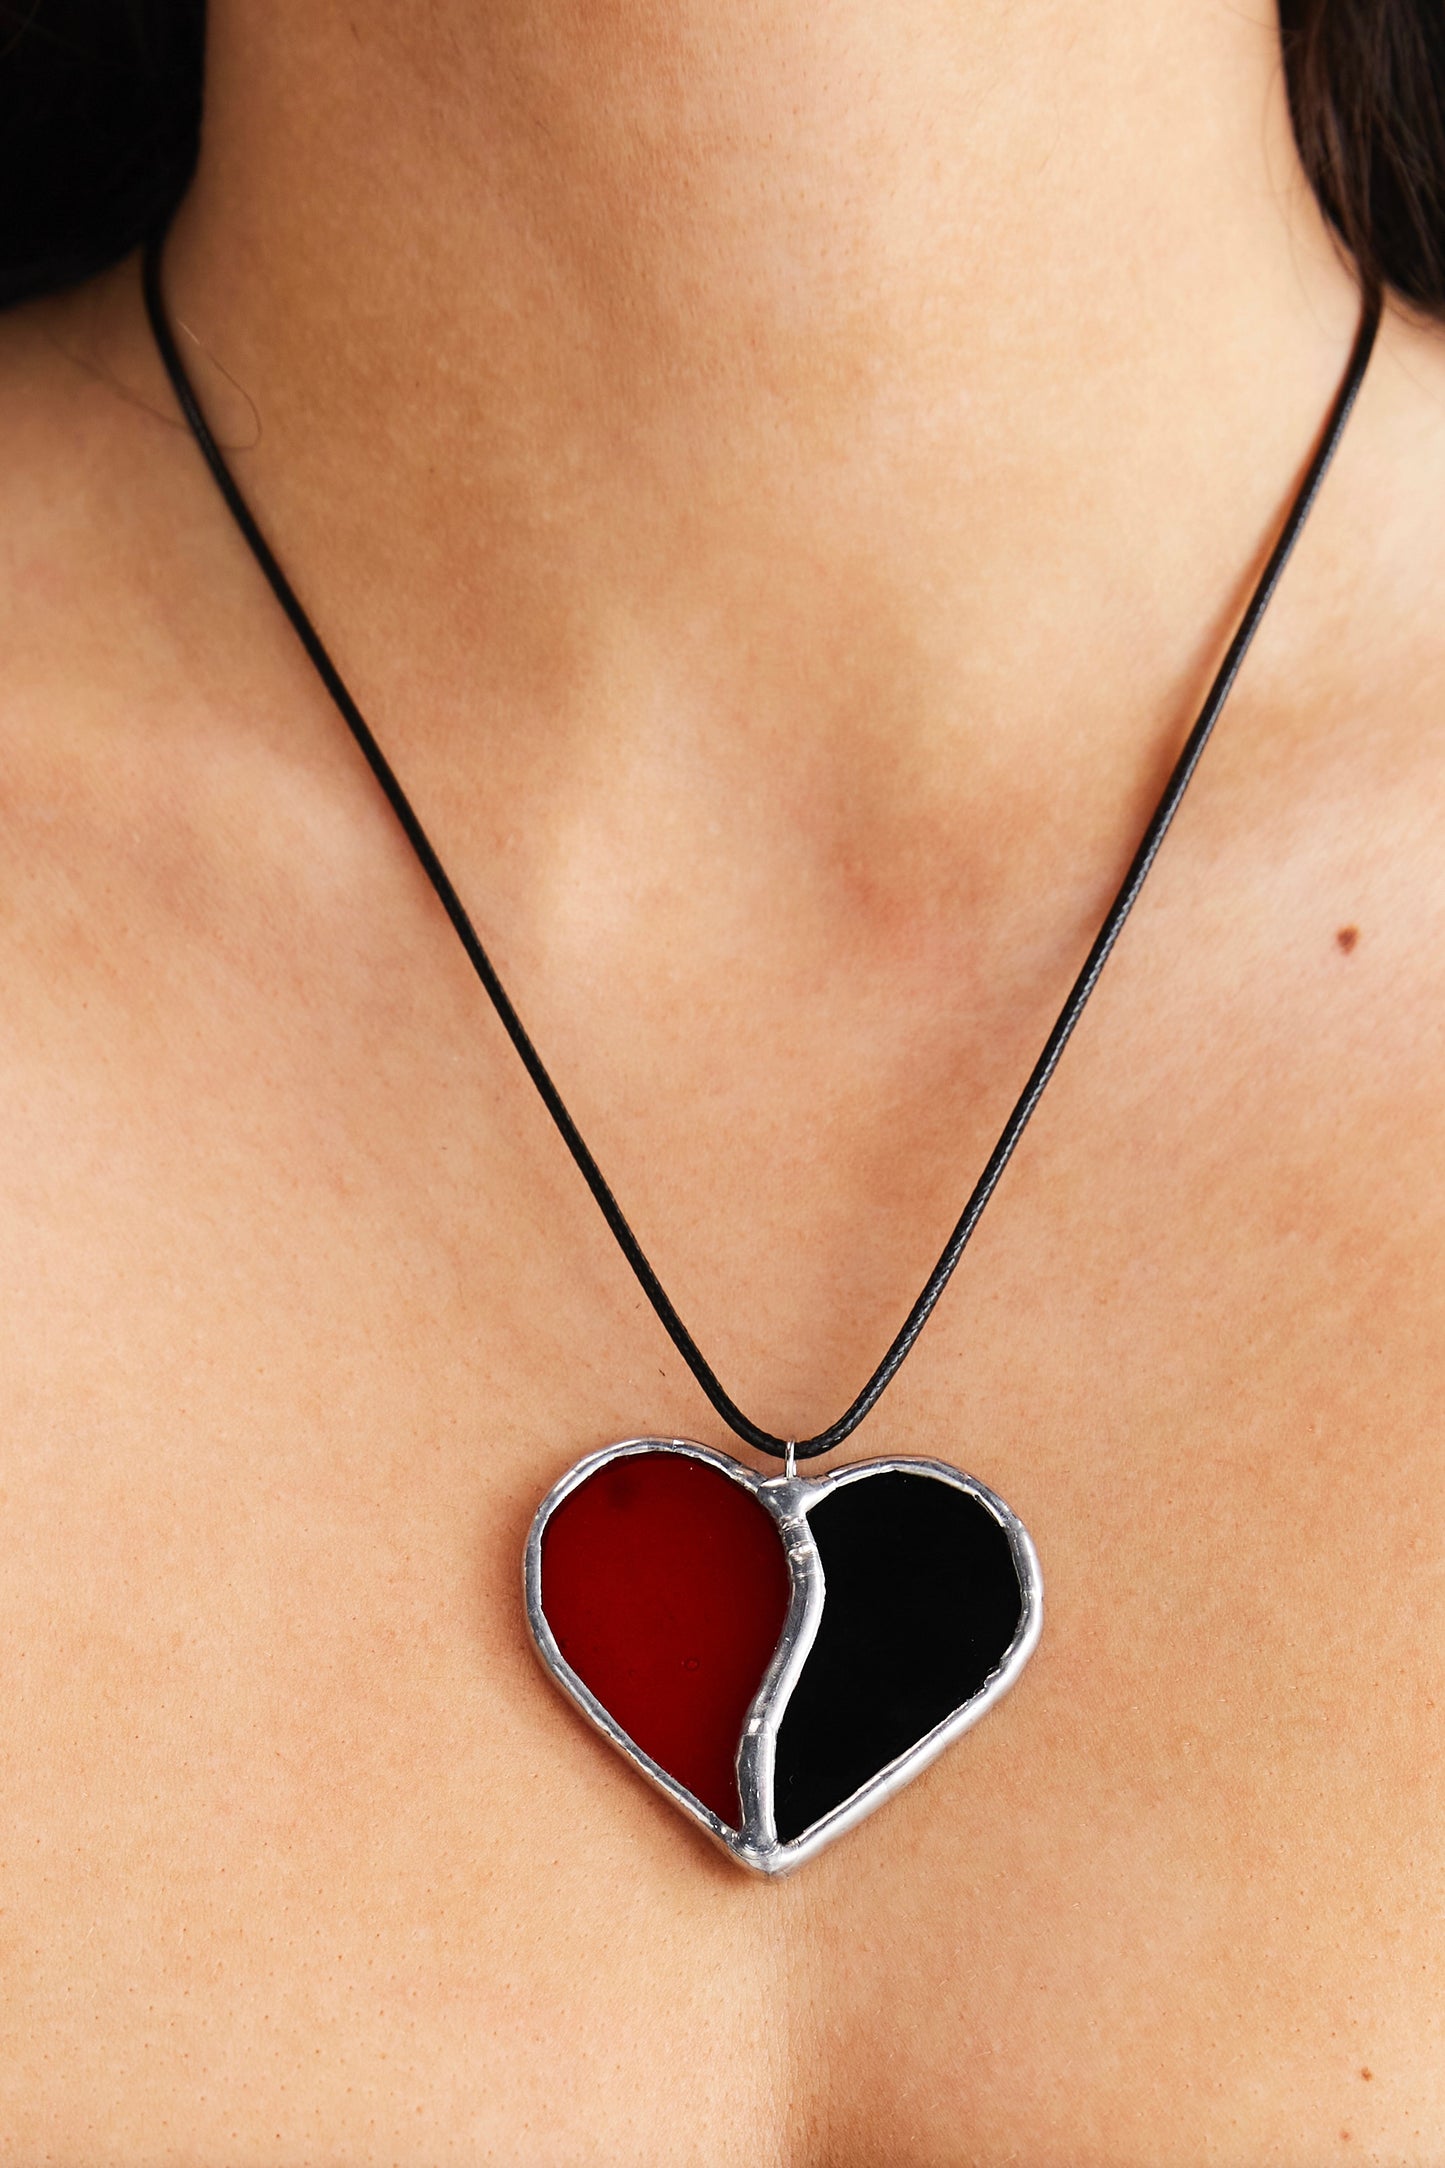 Love Necklace - Black and Ruby